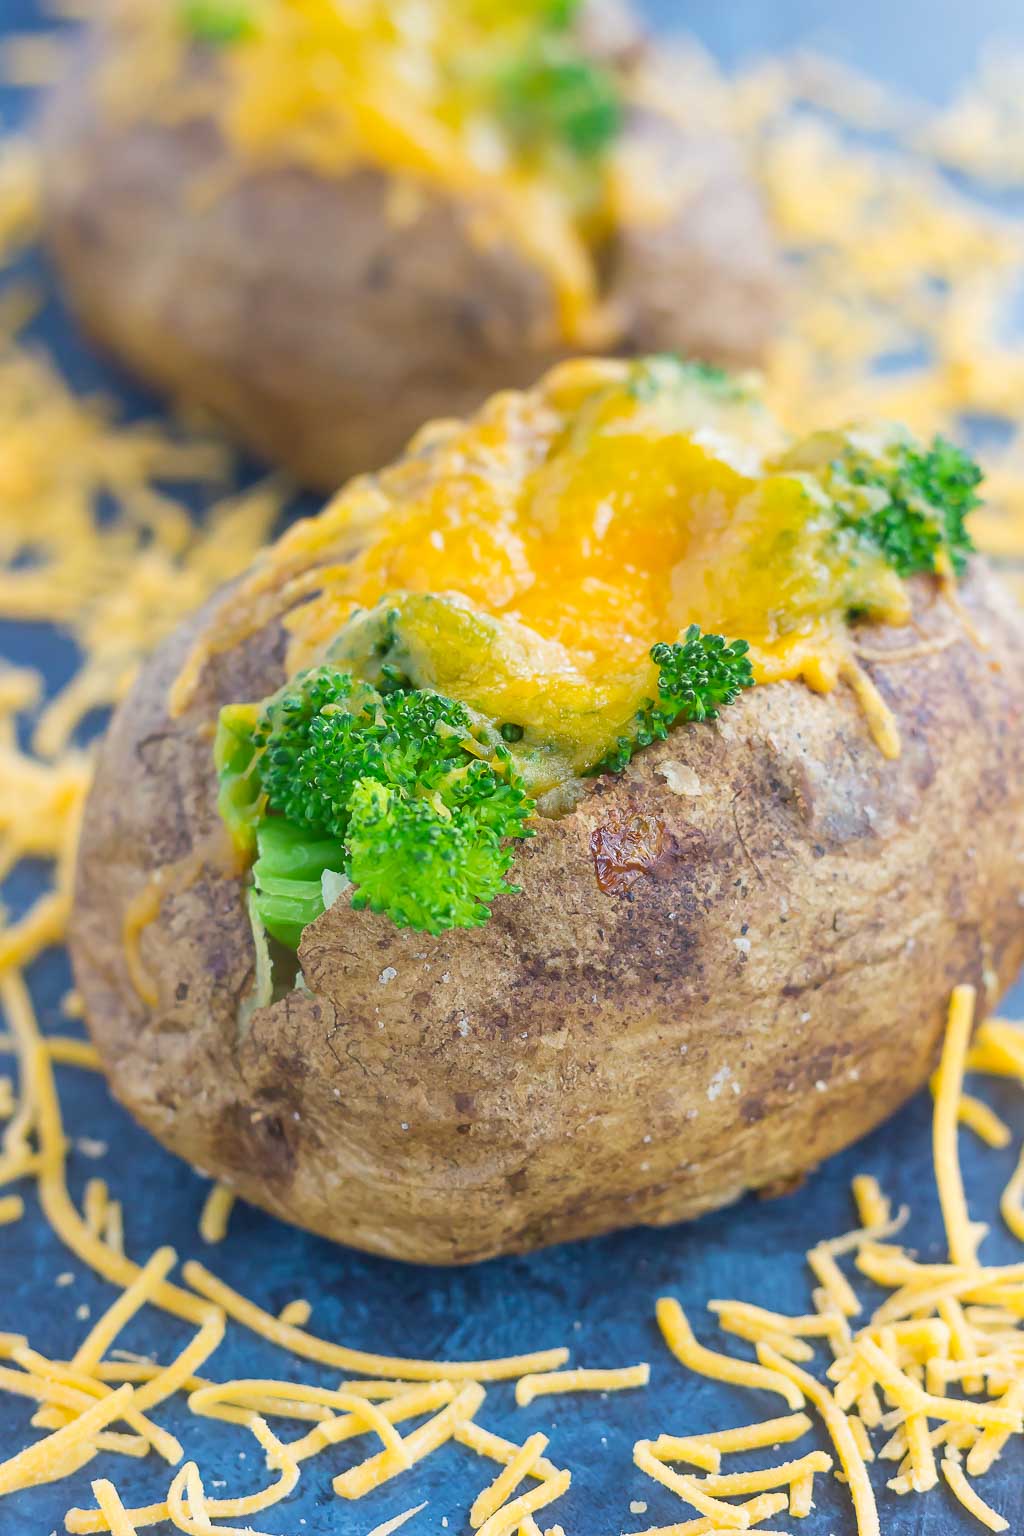 Seasoned potatoes are baked until soft and fluffy on the inside and crisp on the outside. Topped with fresh broccoli and a sprinkling of cheddar cheese, these Broccoli Cheddar Stuffed Baked Potatoes make deliciously easy "meal for one" that's packed with flavor!